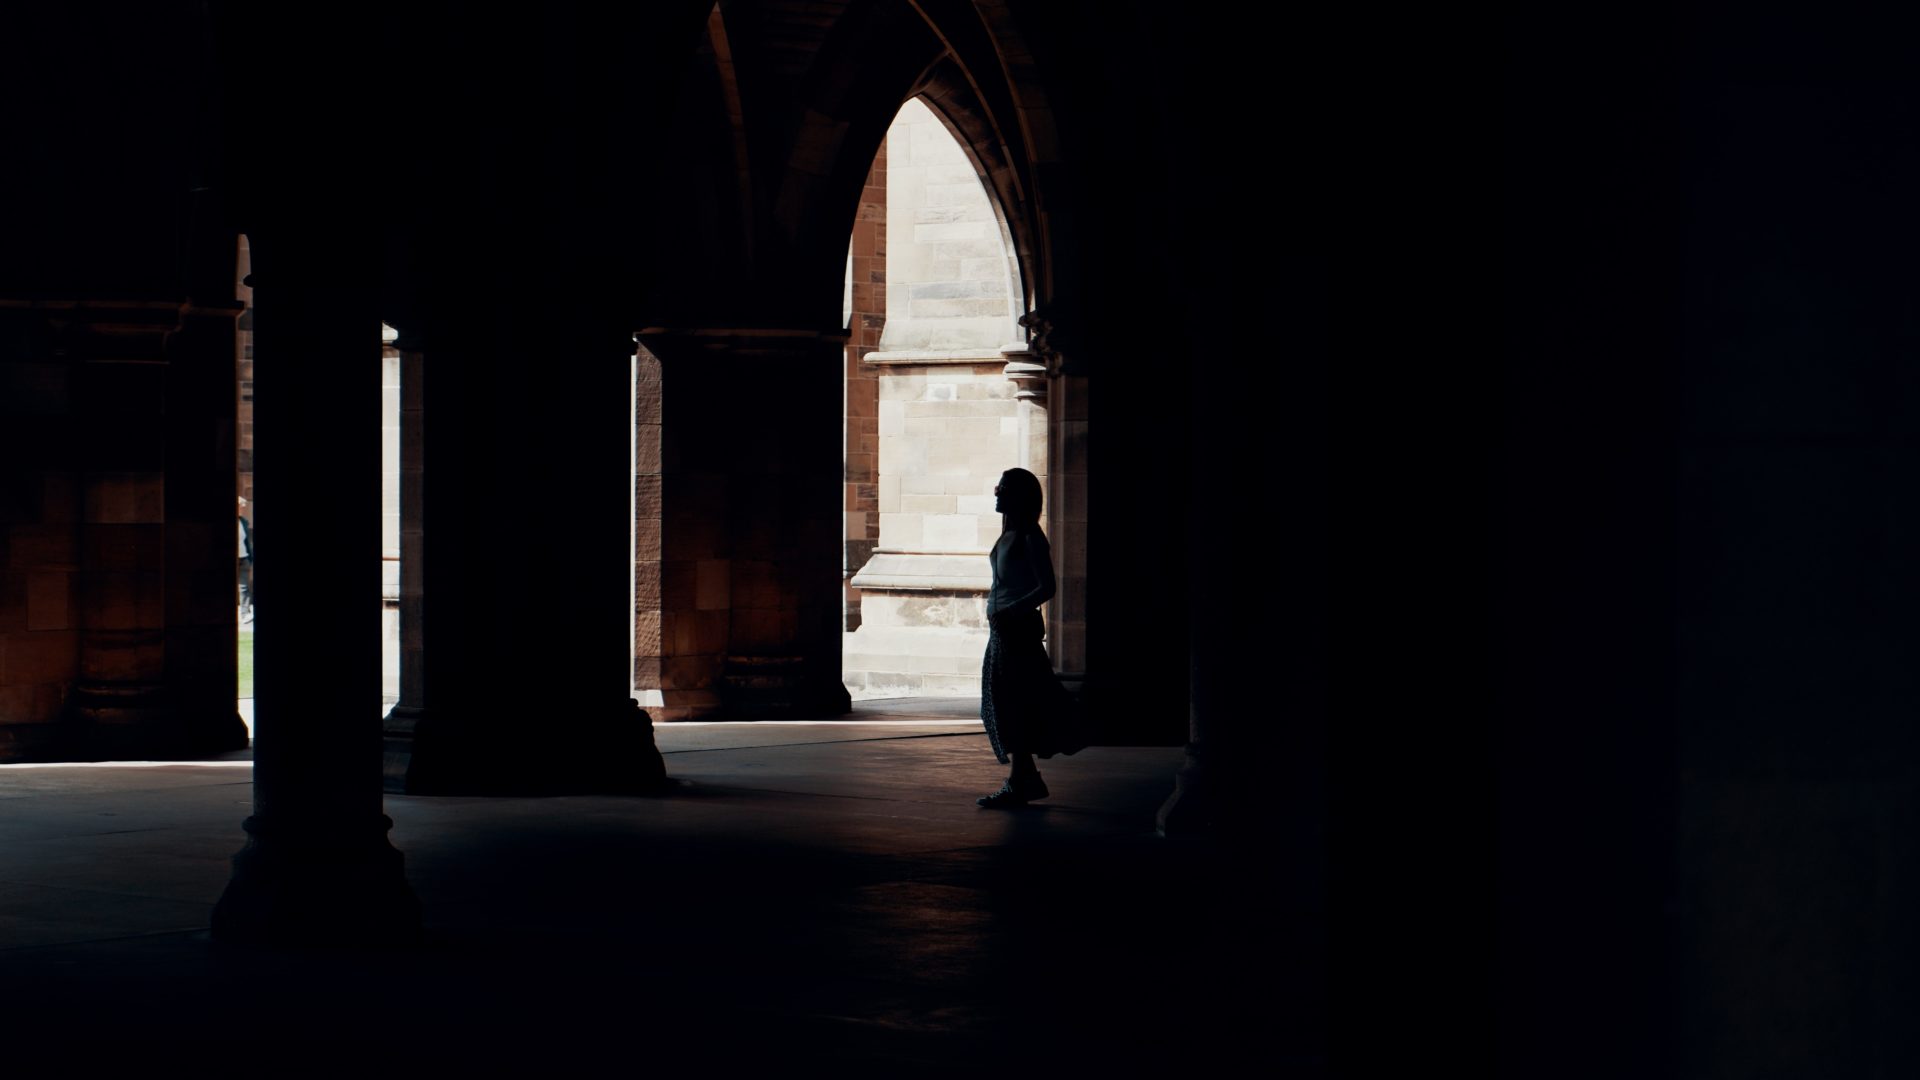 A person stands in the shadows of the arches on the University of Glasgow campus